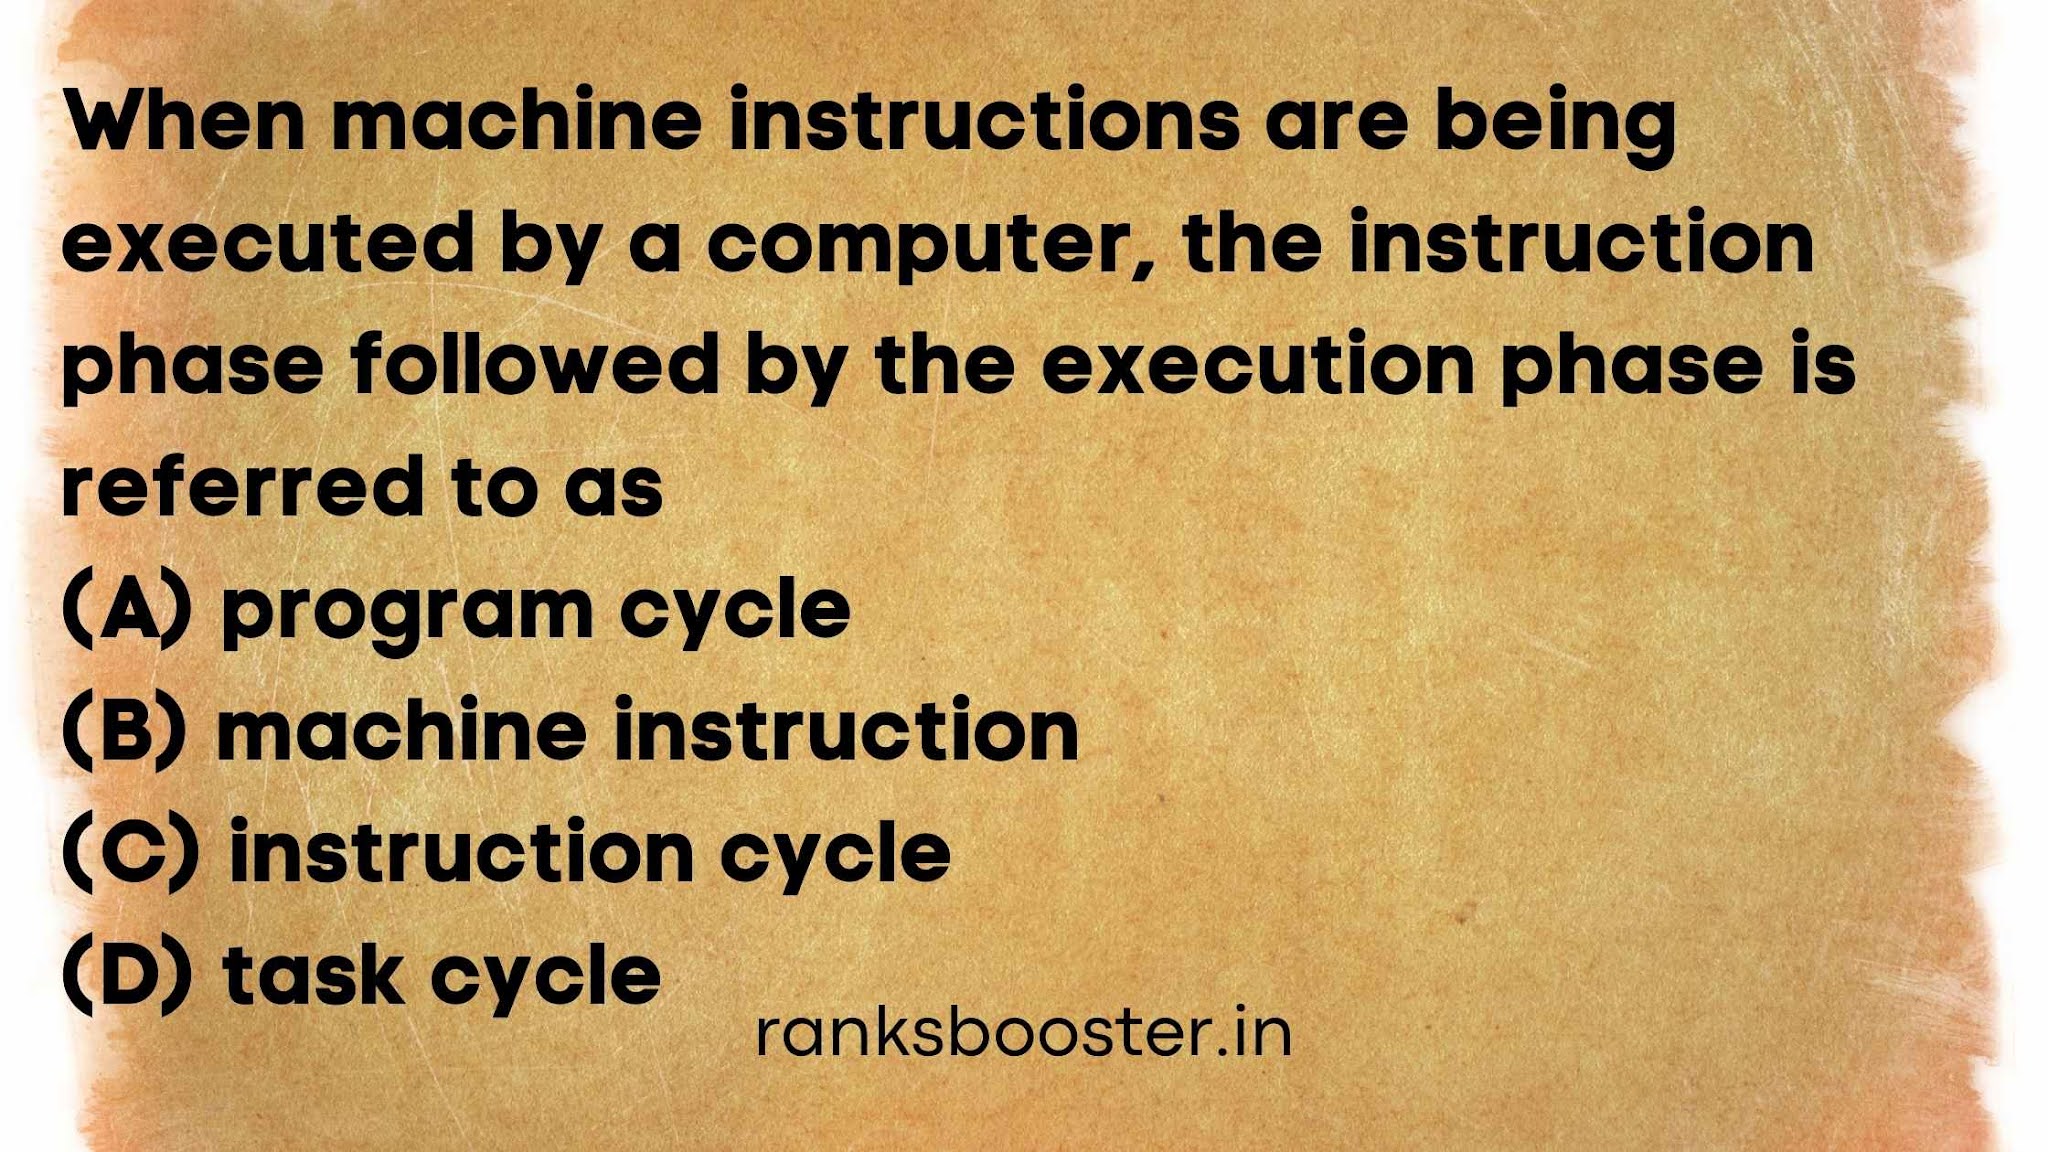 When machine instructions are being executed by a computer, the instruction phase followed by the execution phase is referred to as (A) program cycle (B) machine instruction (C) instruction cycle (D) task cycle